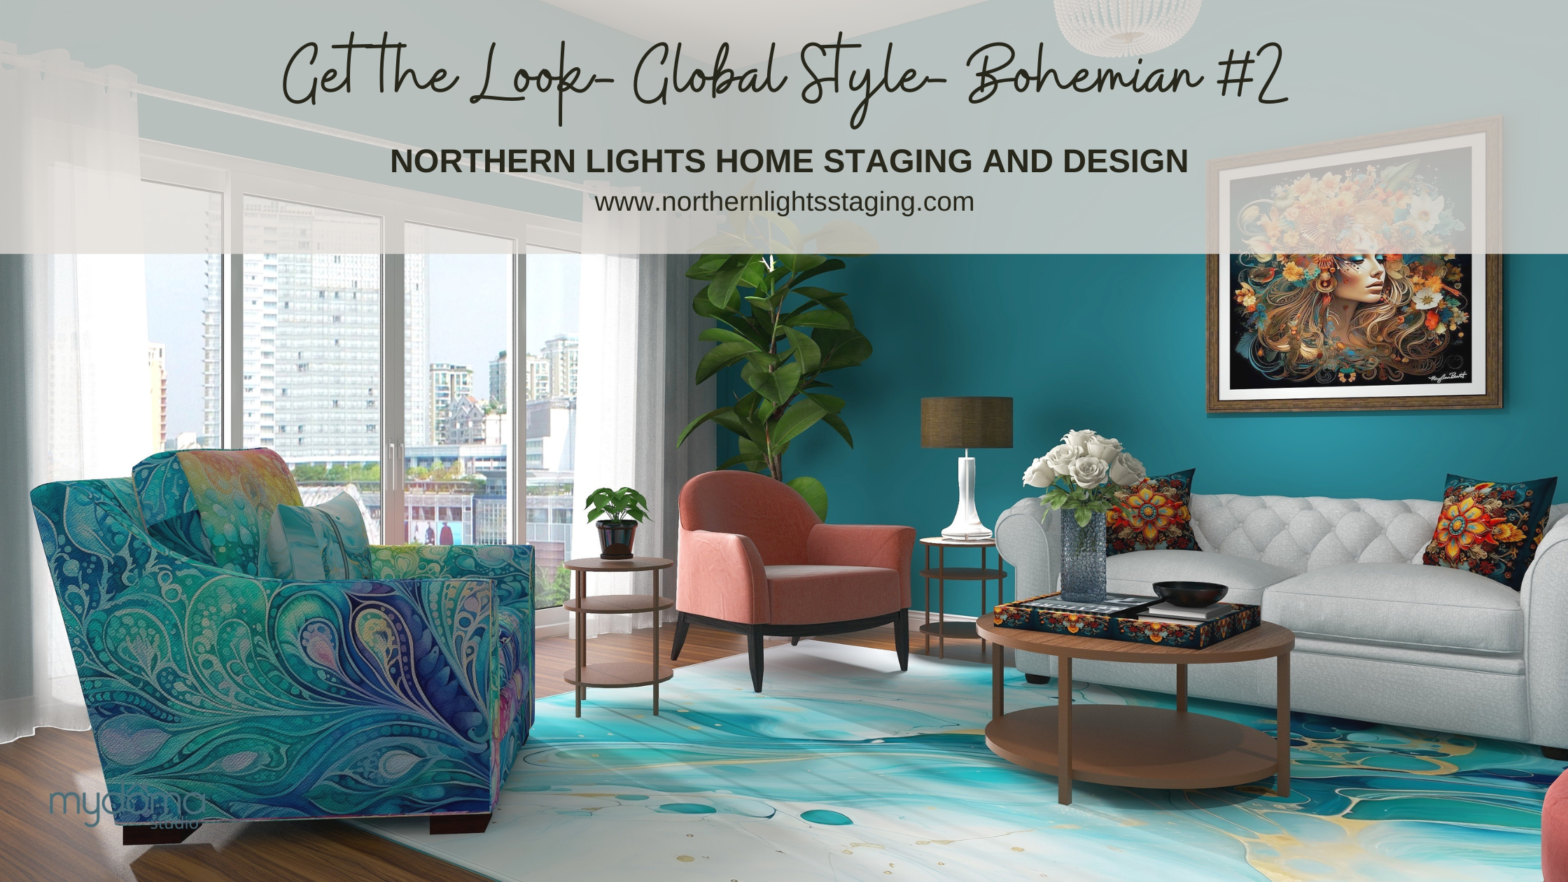 Get the Look- Global Style-Bohemian #2